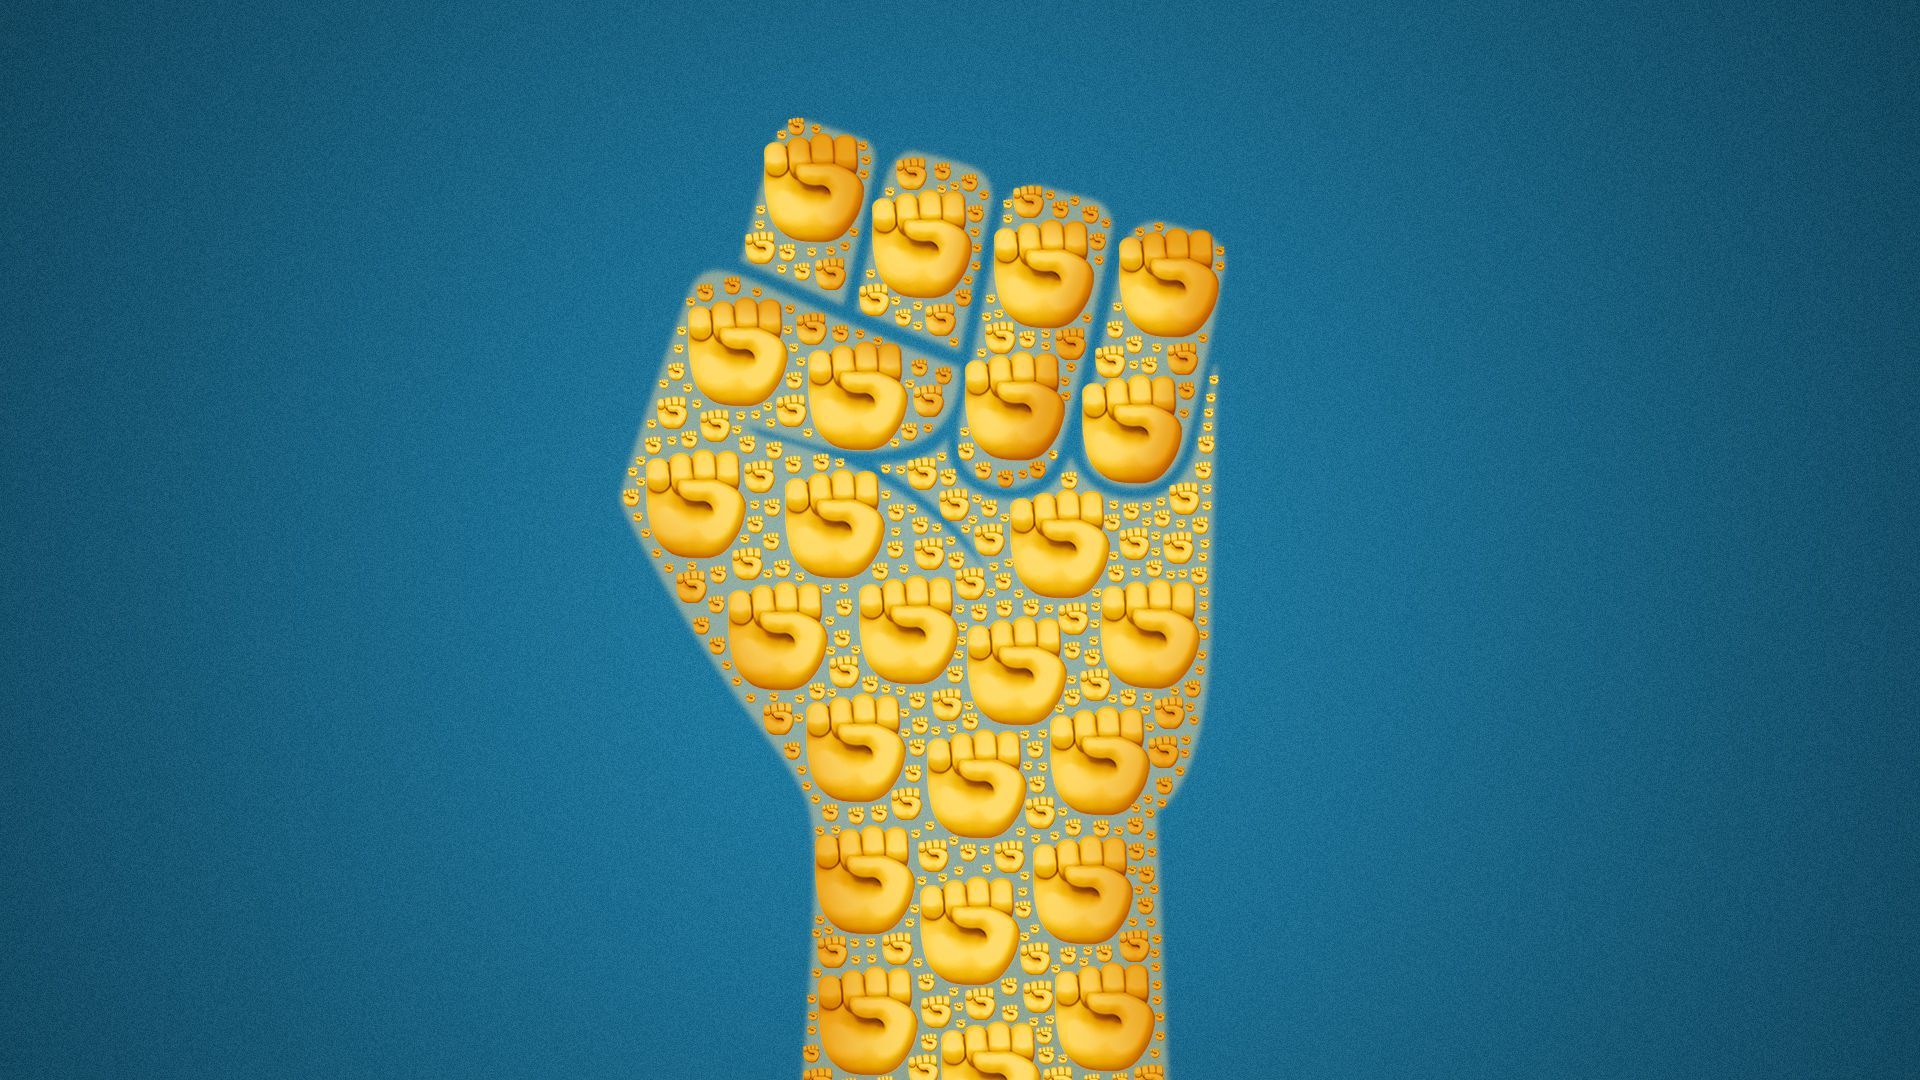 Illustration of a large fist made up of many smaller fists.   